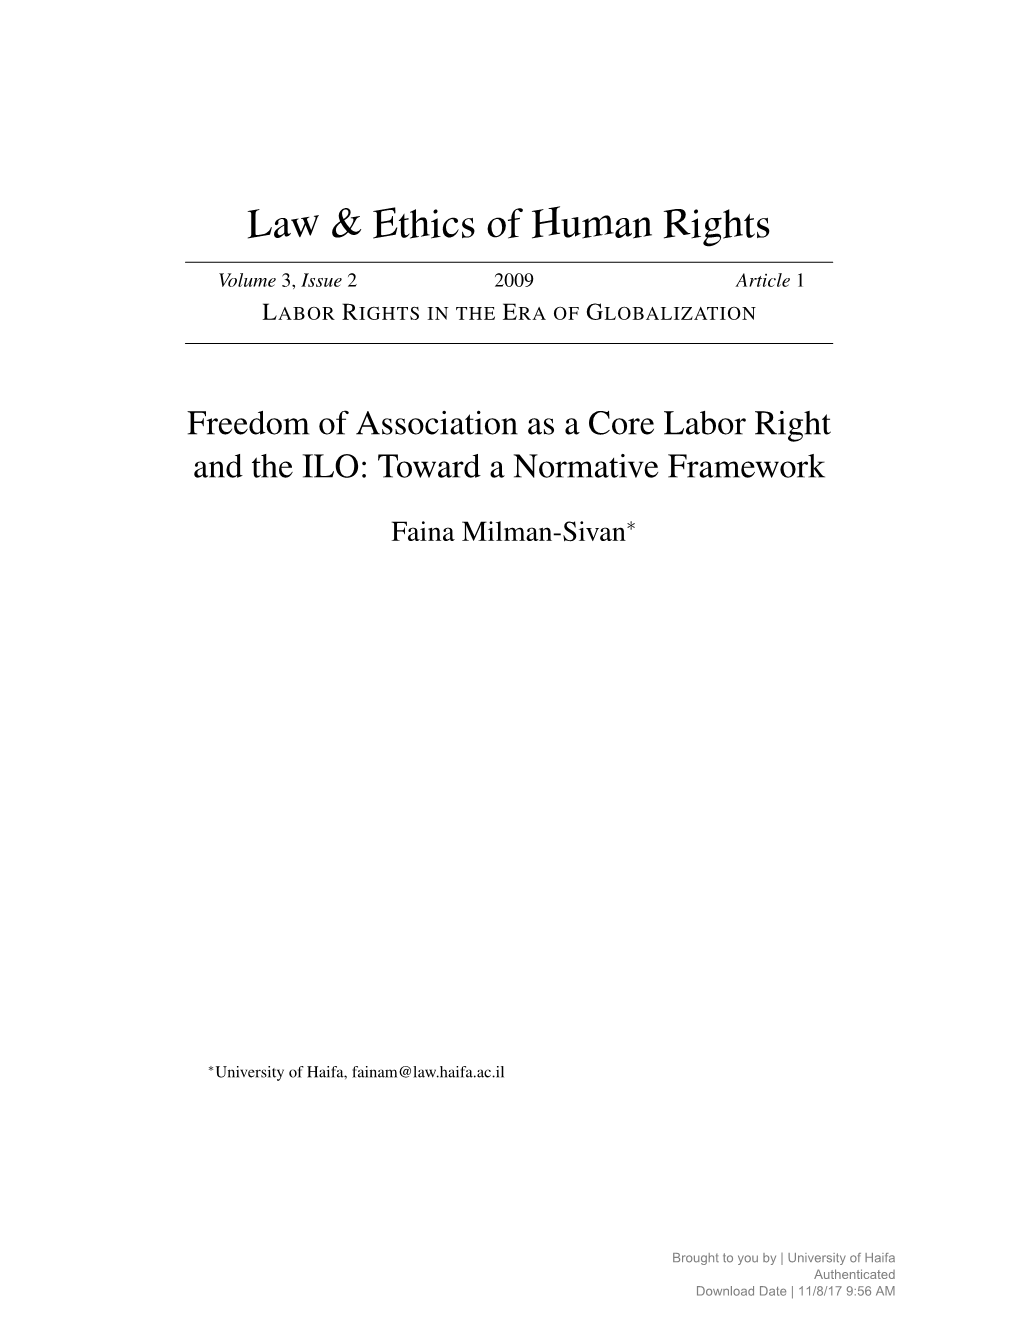 Freedom of Association As a Core Labor Right and the ILO: Toward a Normative Framework∗